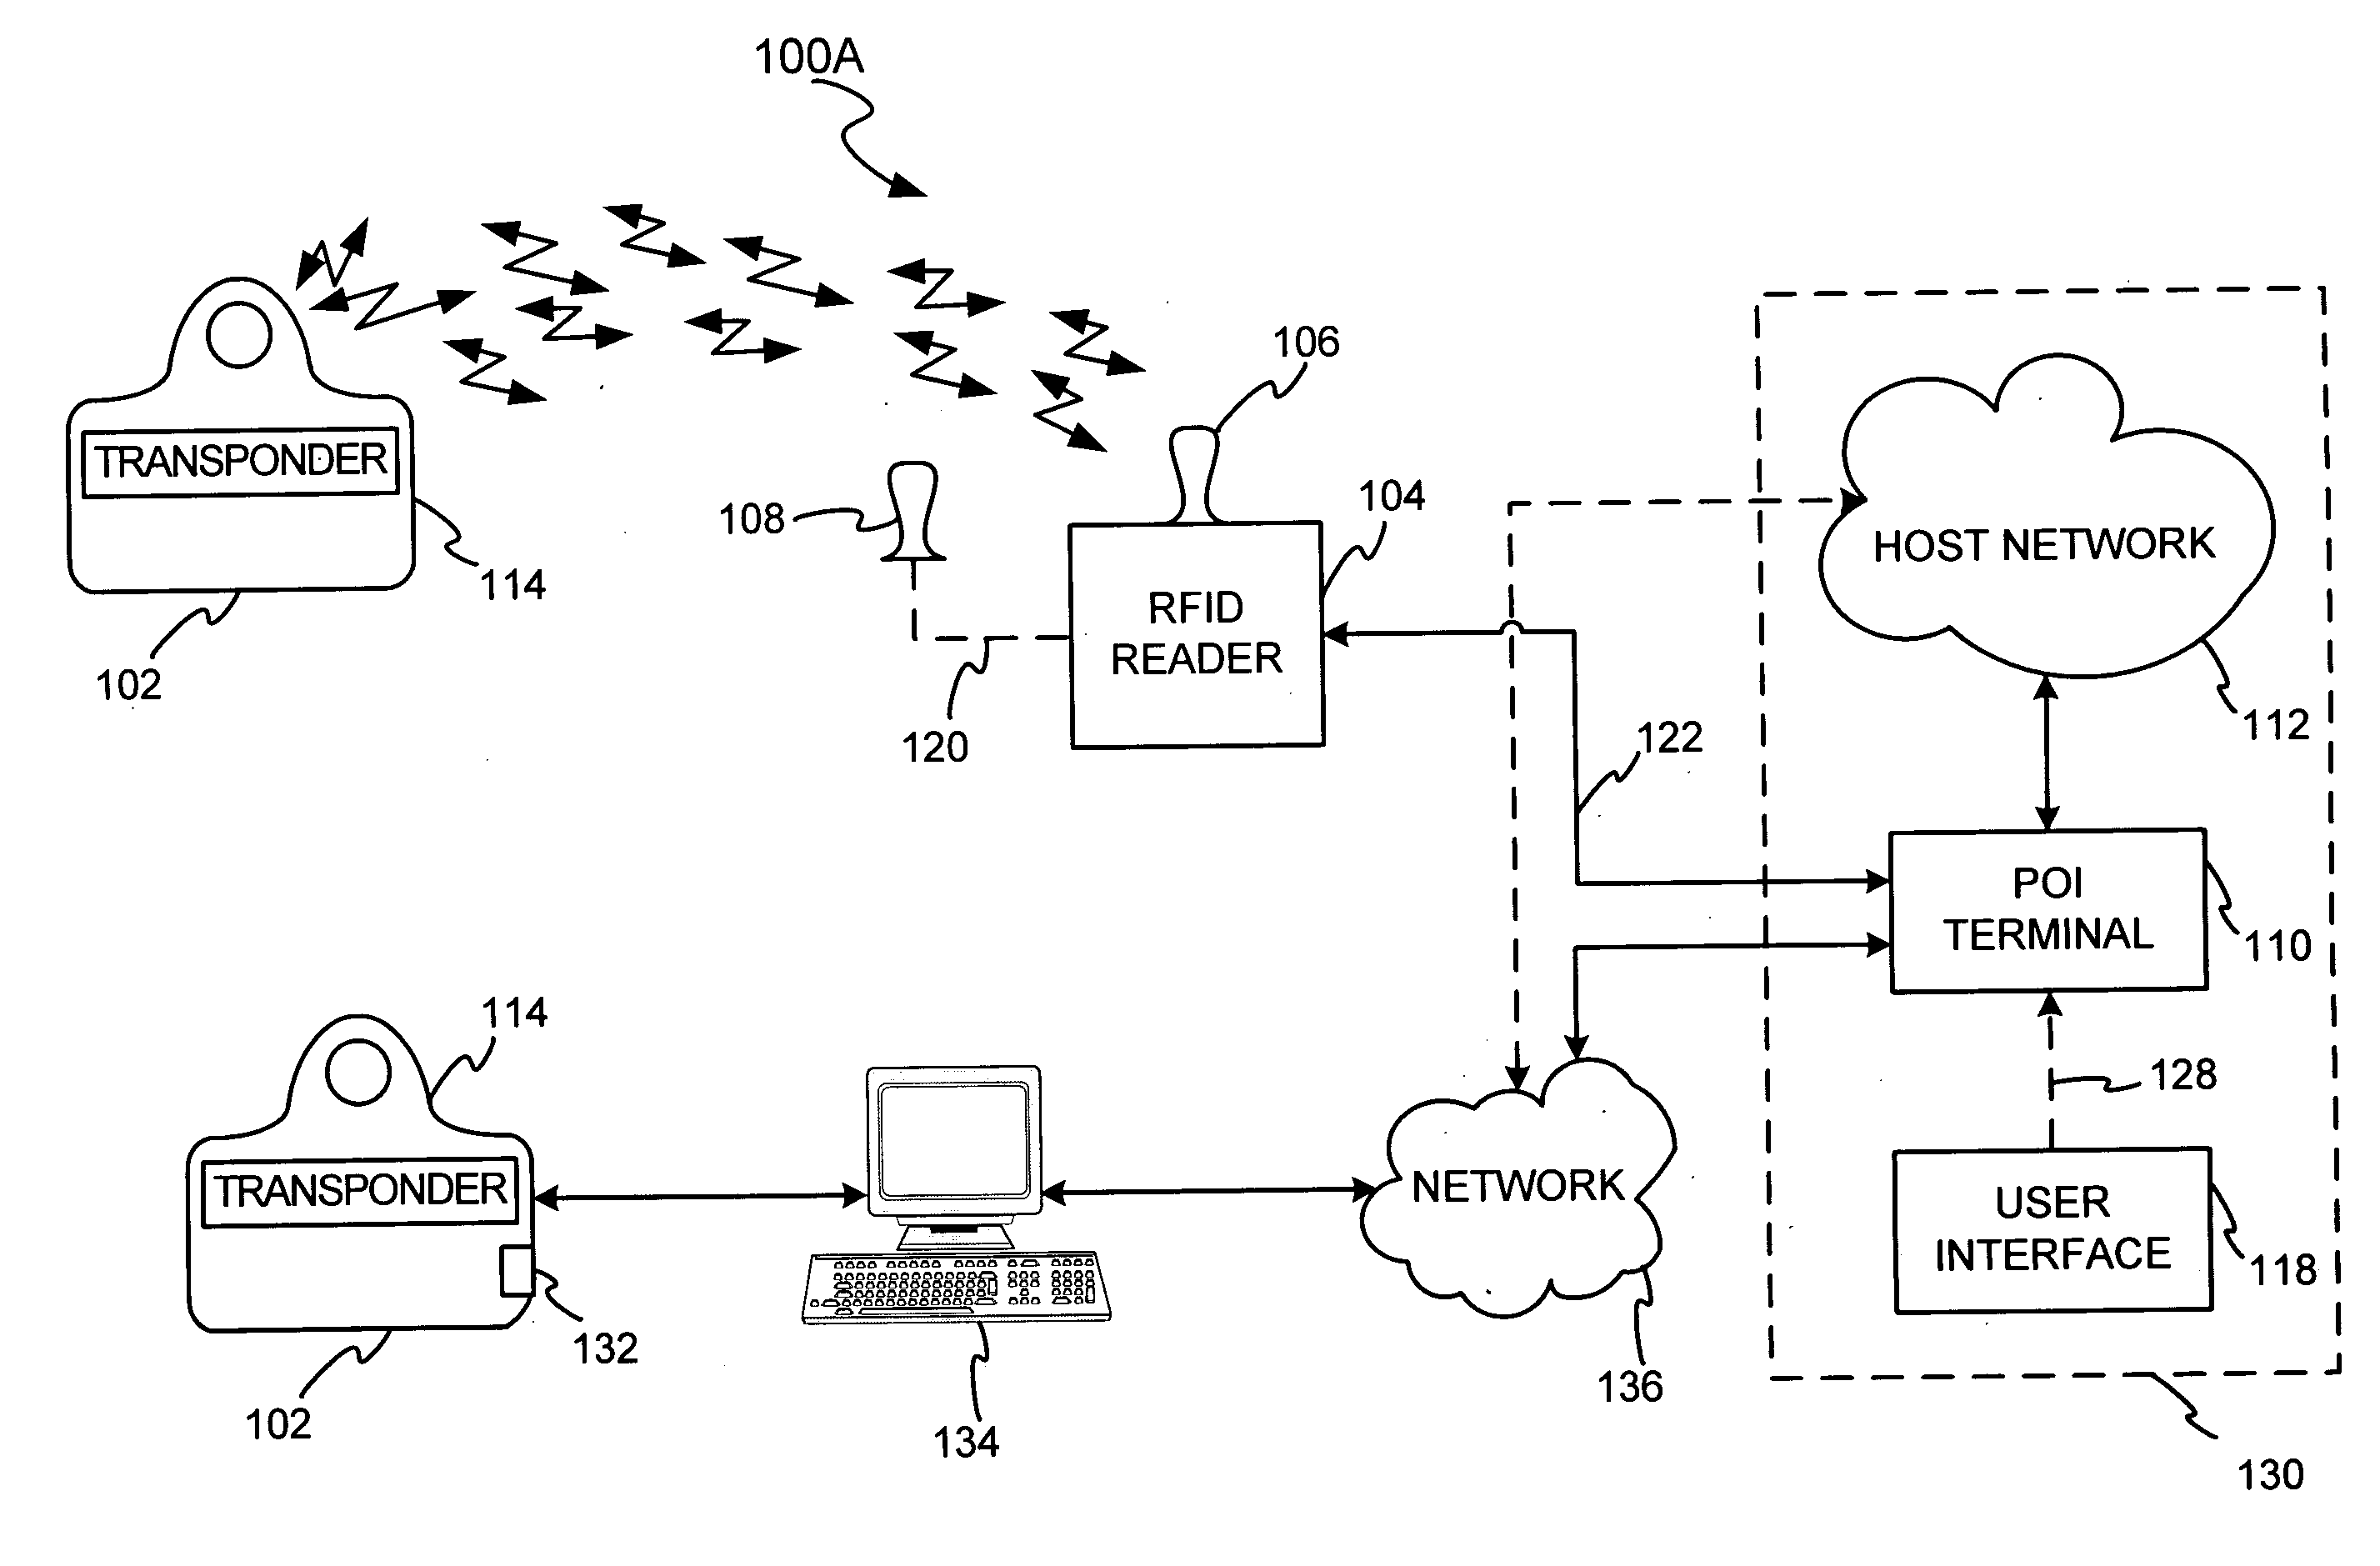 Method and system for facilitating a shopping experience